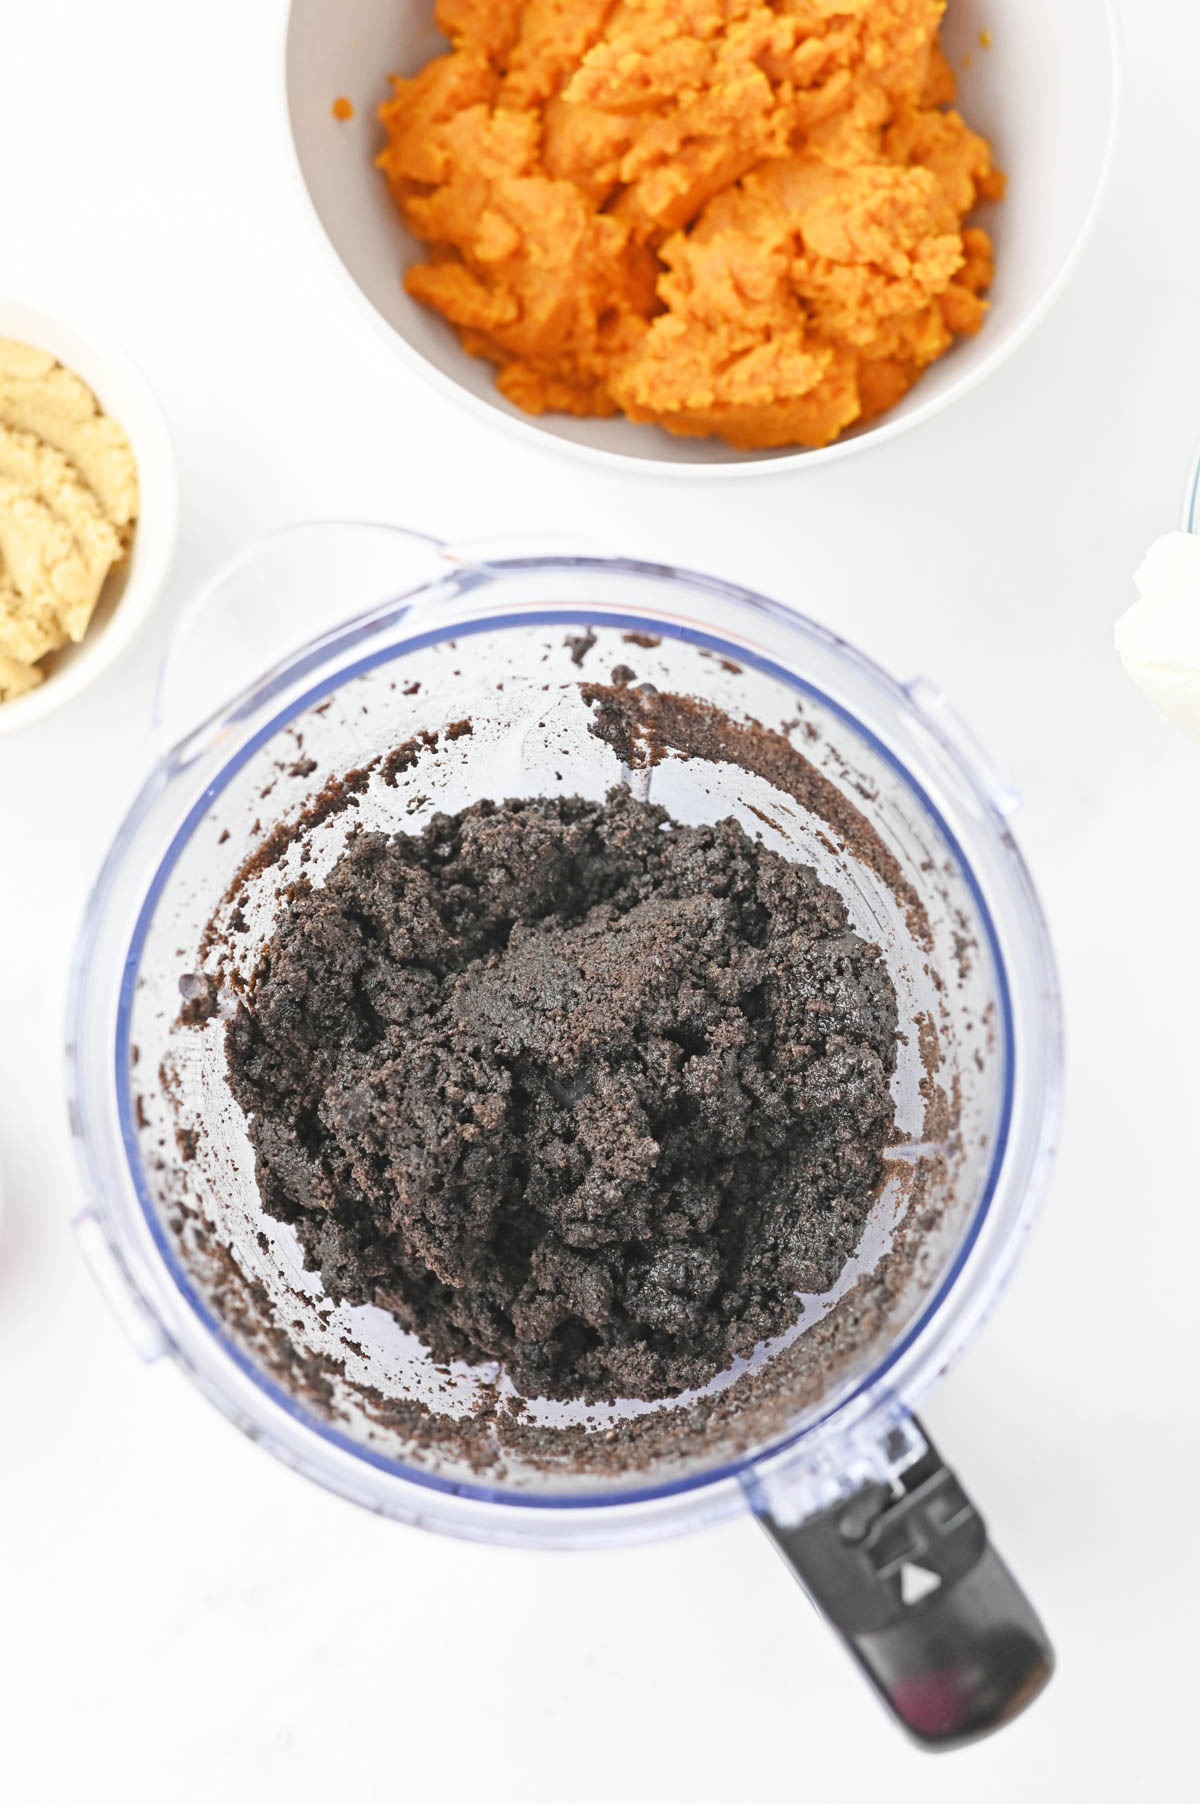 Oreo cookie crumbs and butter in food processor